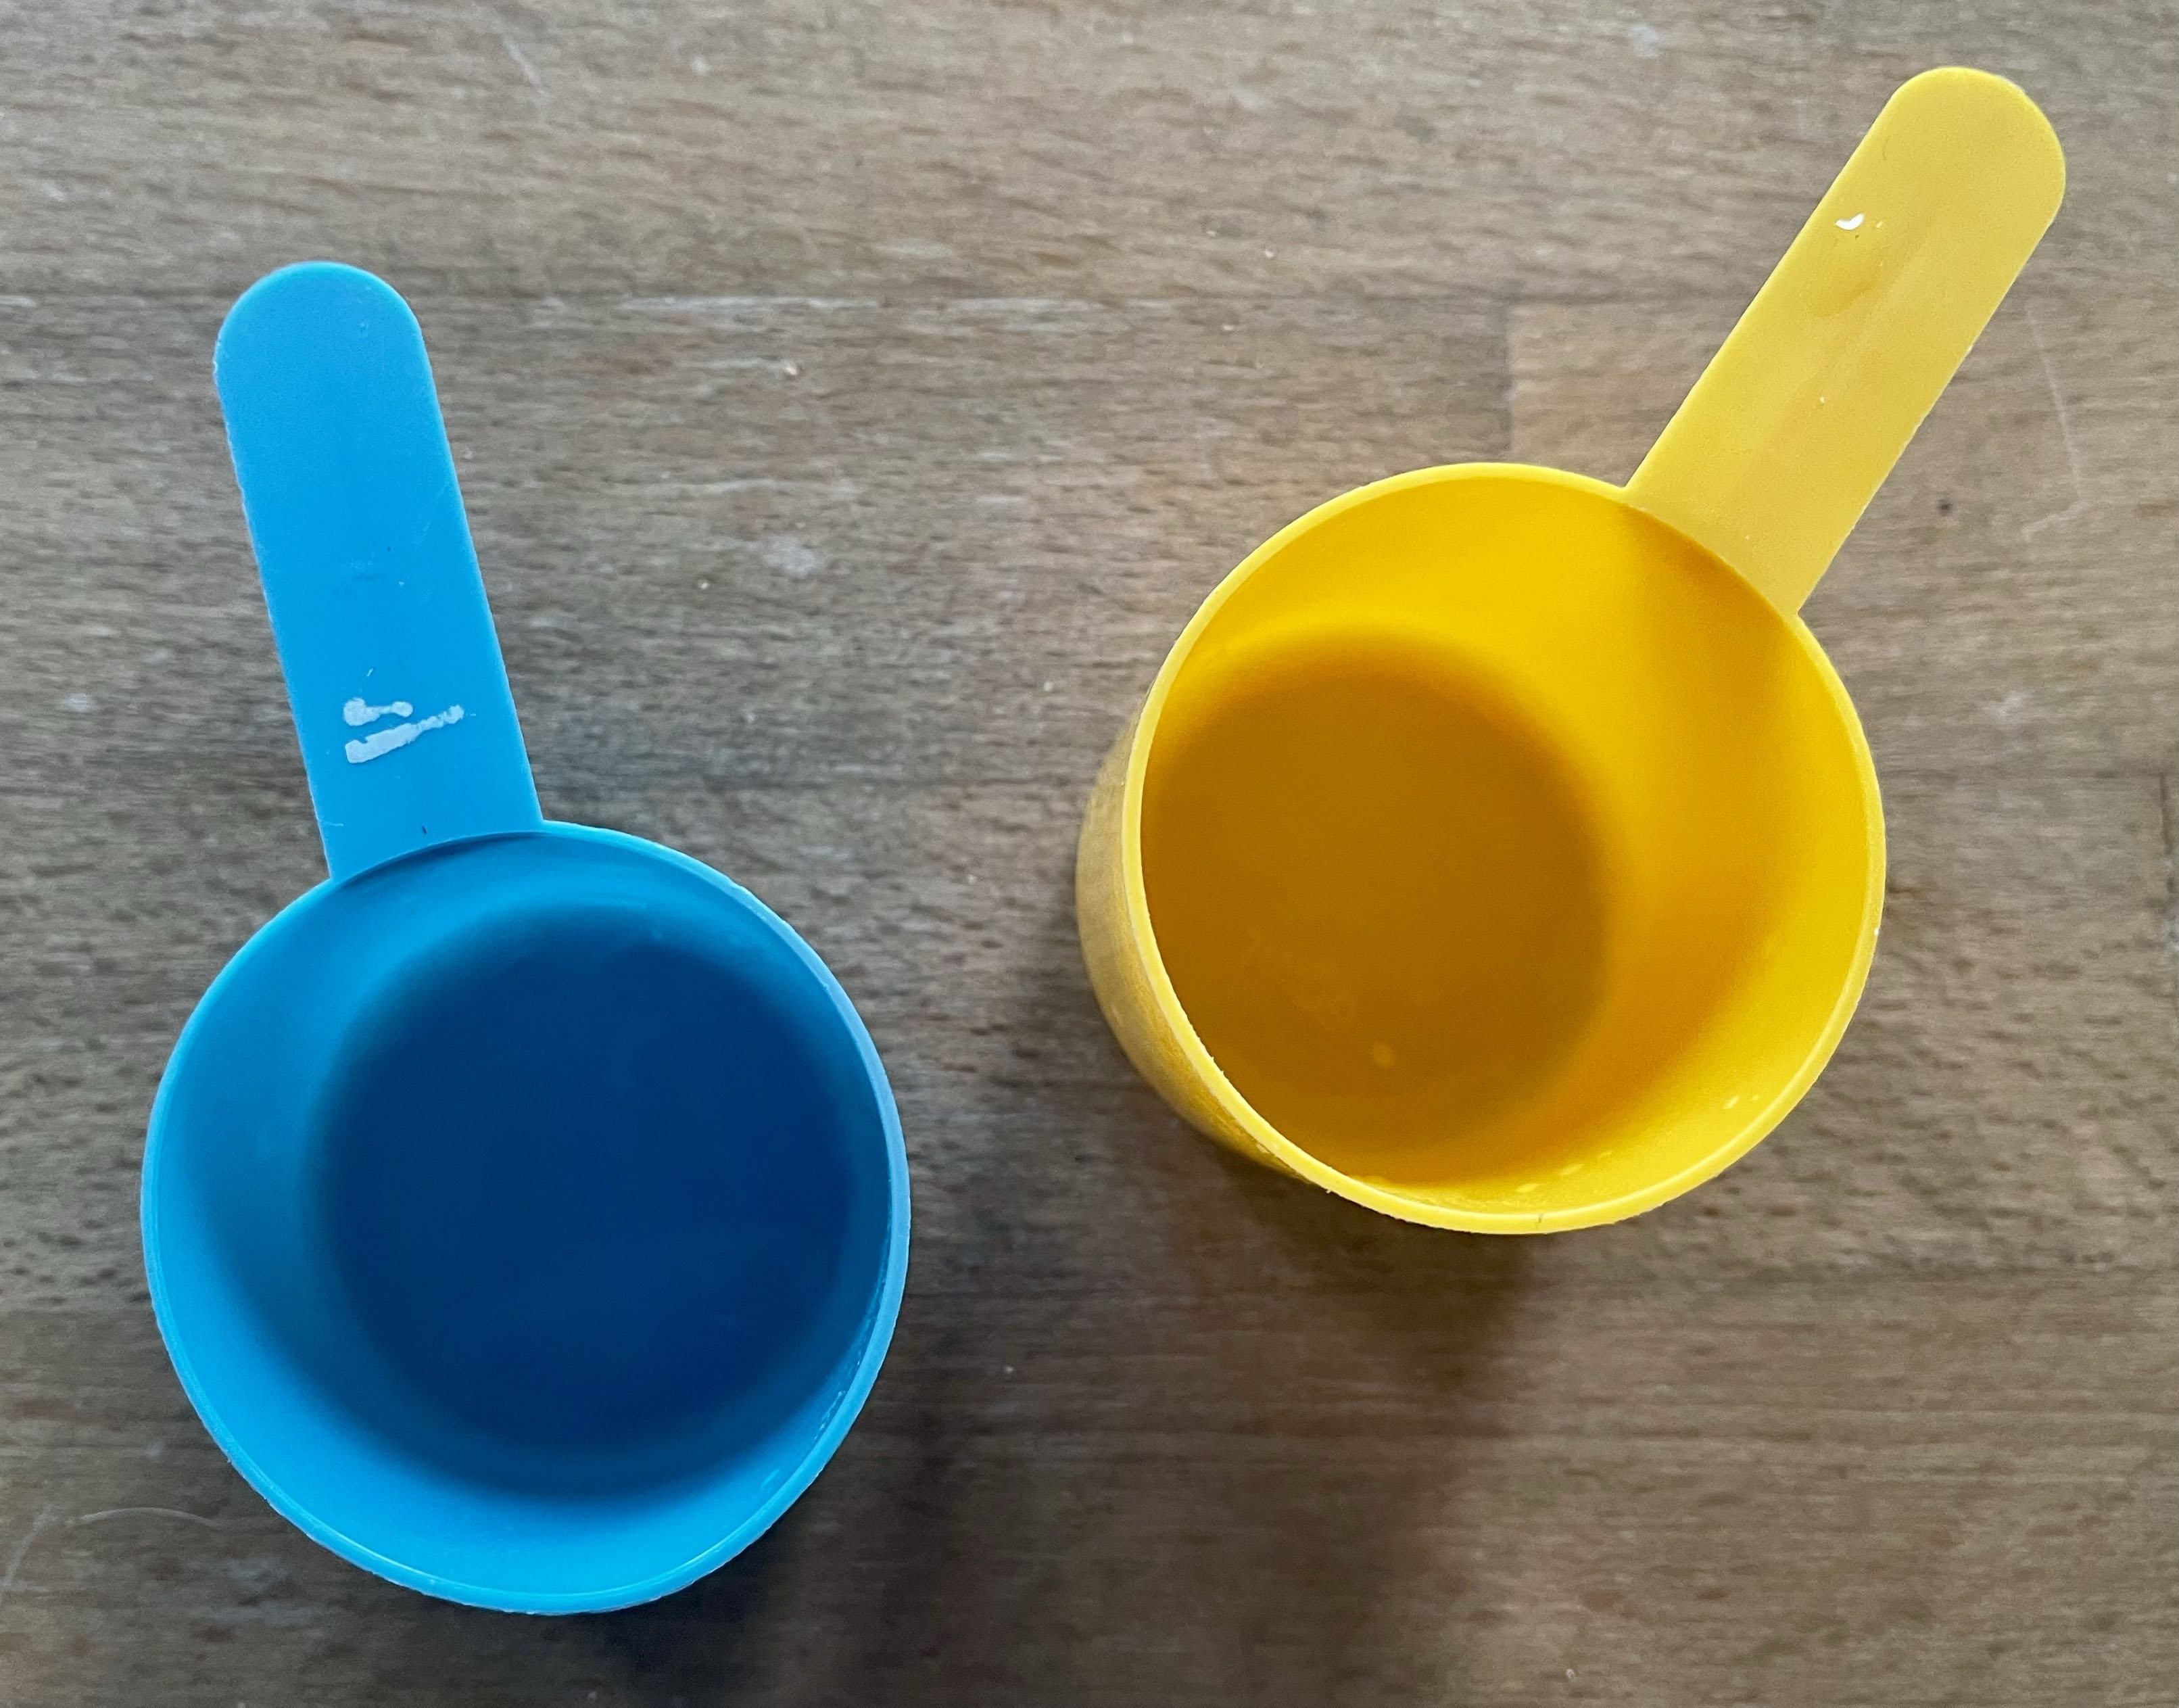 Photograph of two small plastic scoops, one blue, one yellow